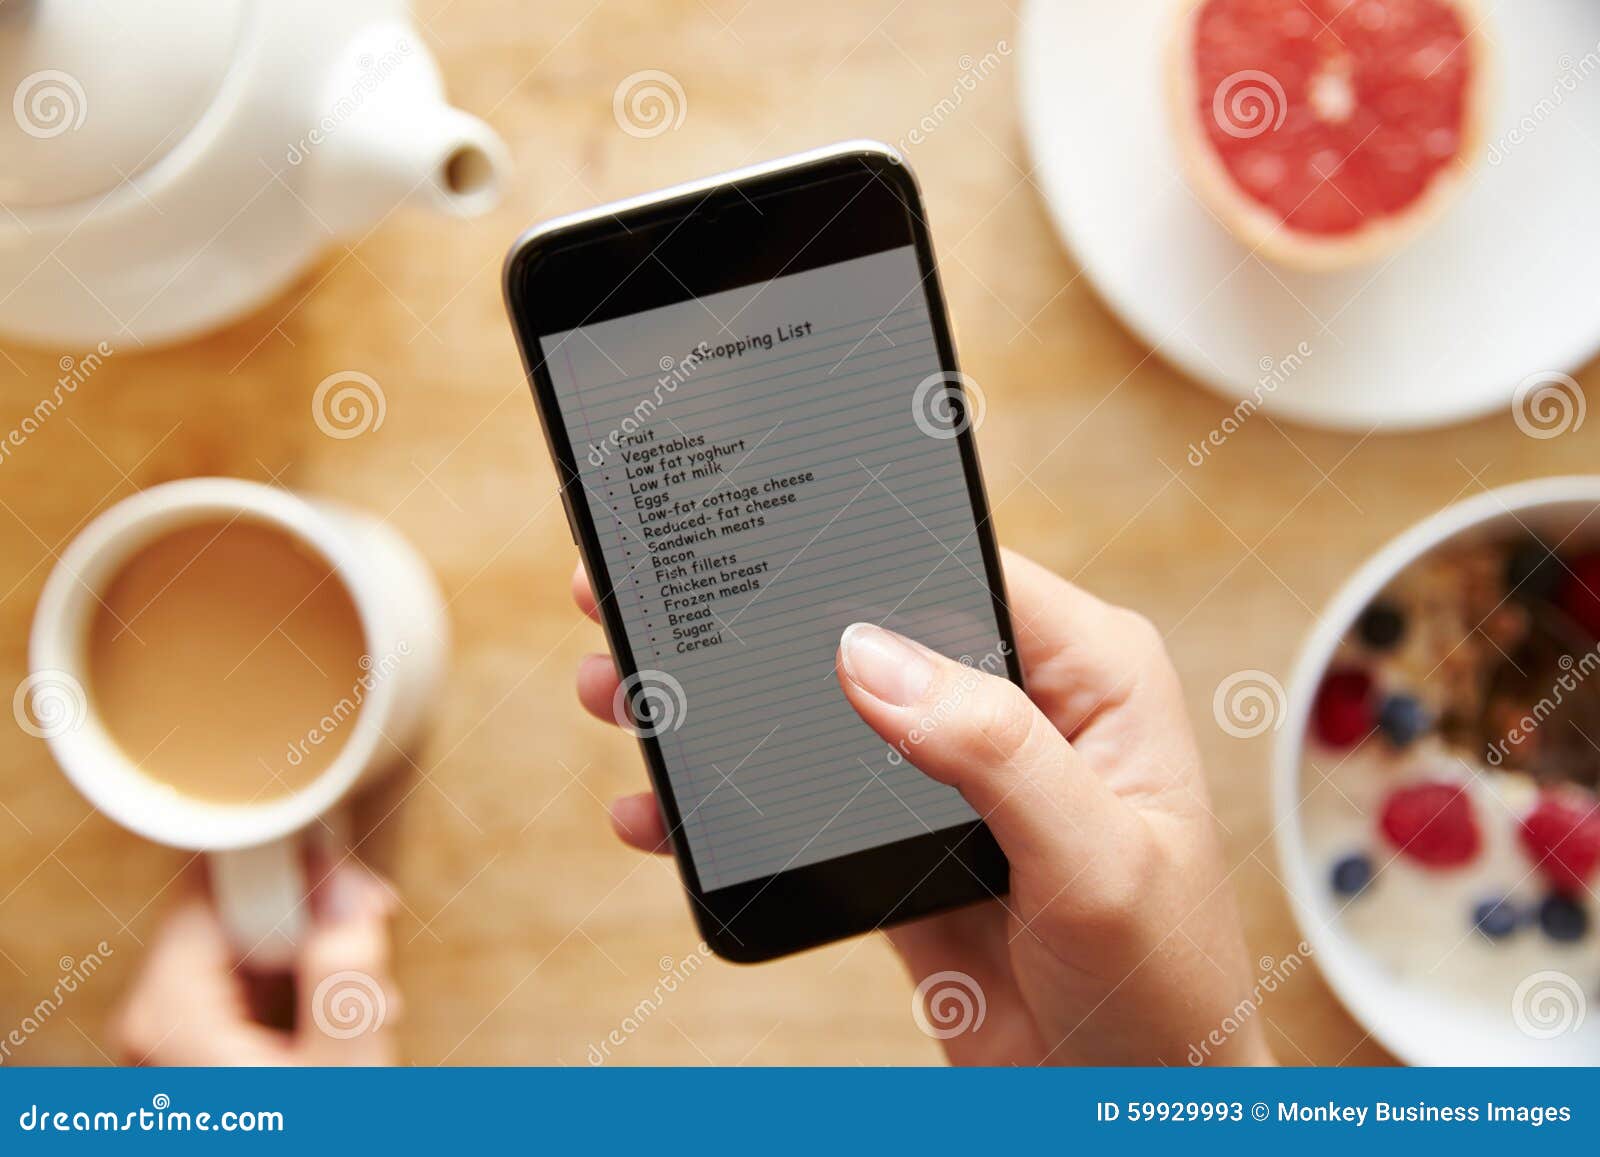 person at breakfast looking at to do list on mobile phone